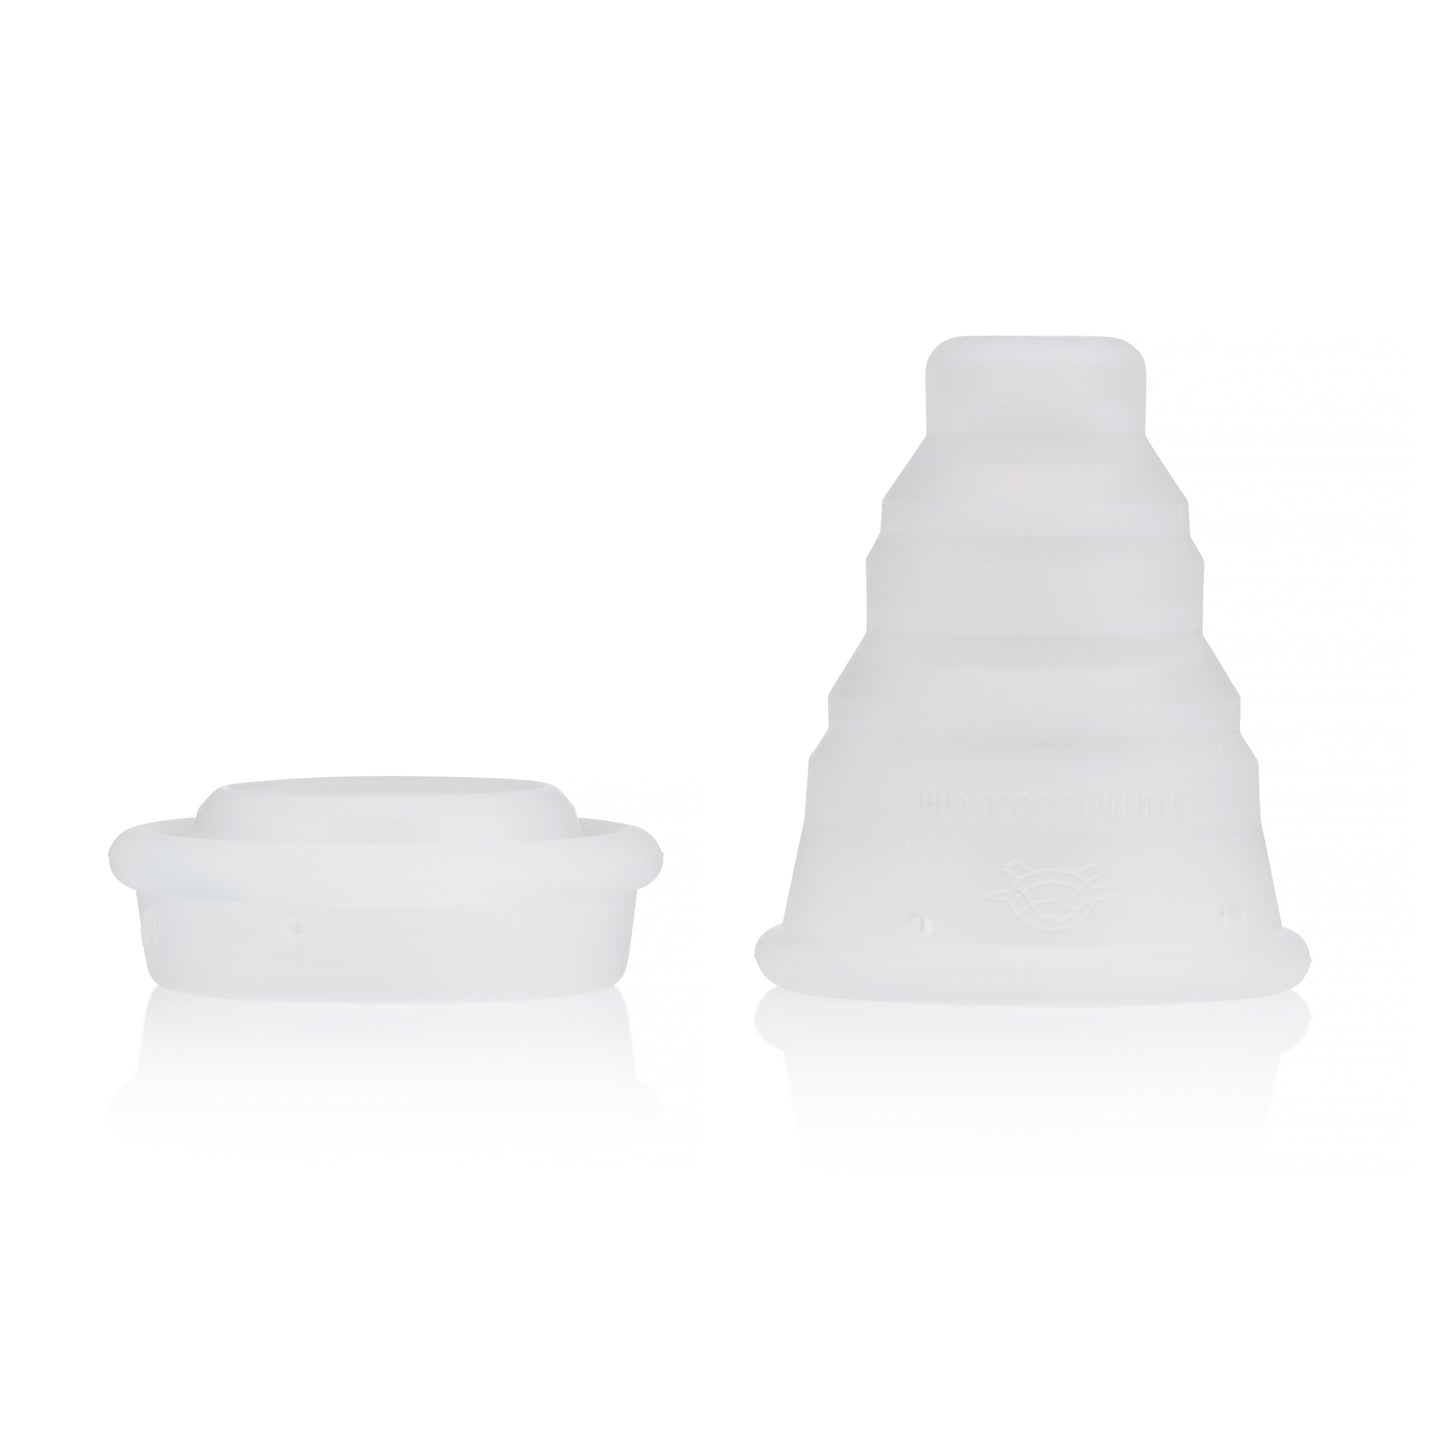 Funmicup No-stem Collapsible Menstrual Cup - Small white background